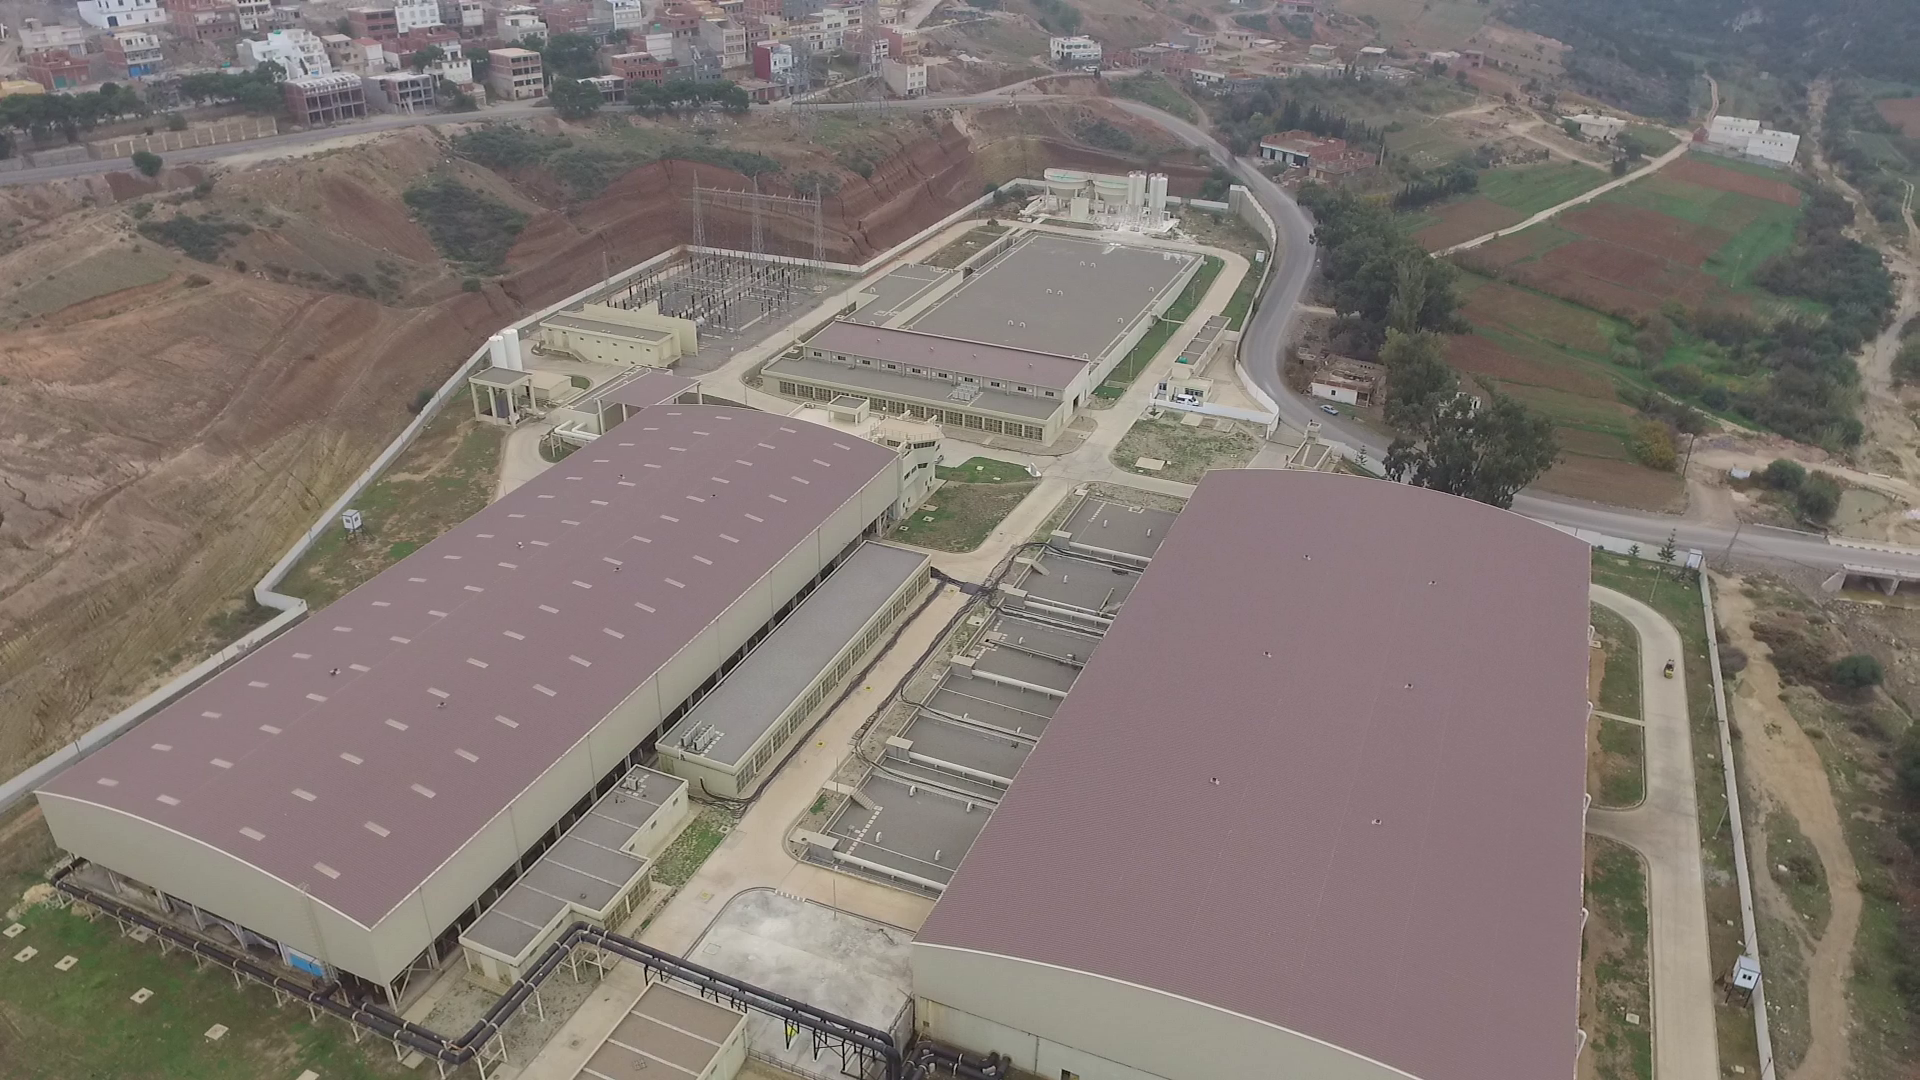 overview using drone of building power plant training